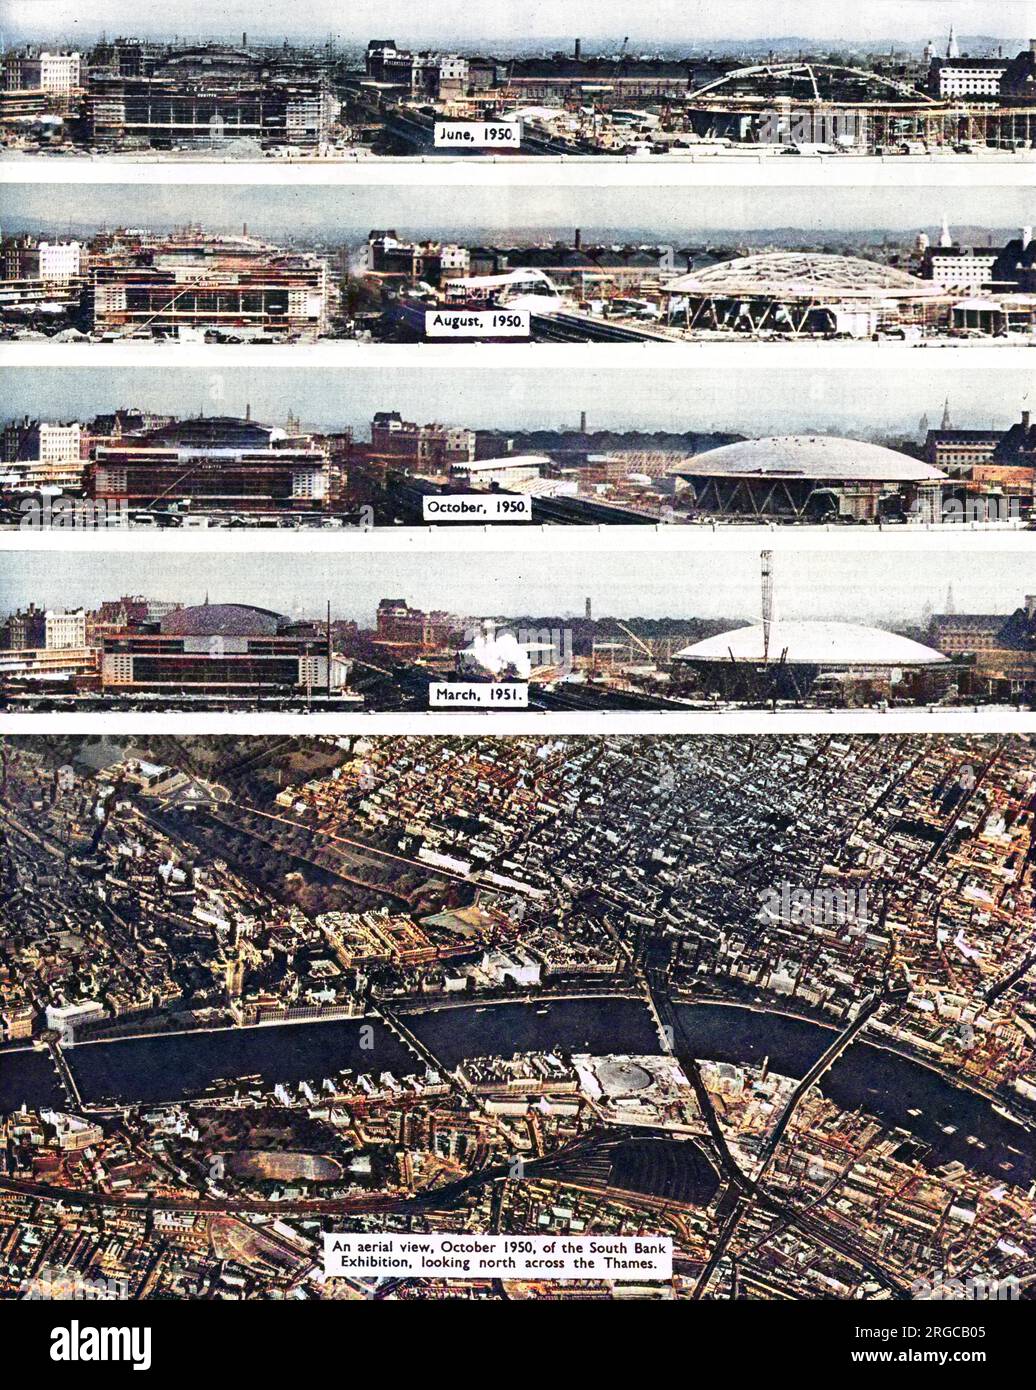 Four views of the Festival of Britain construction, dating from June 1950 to March 1951, with an aerial view below, showing London's South Bank in October 1950, looking north across the River Thames. Stock Photo